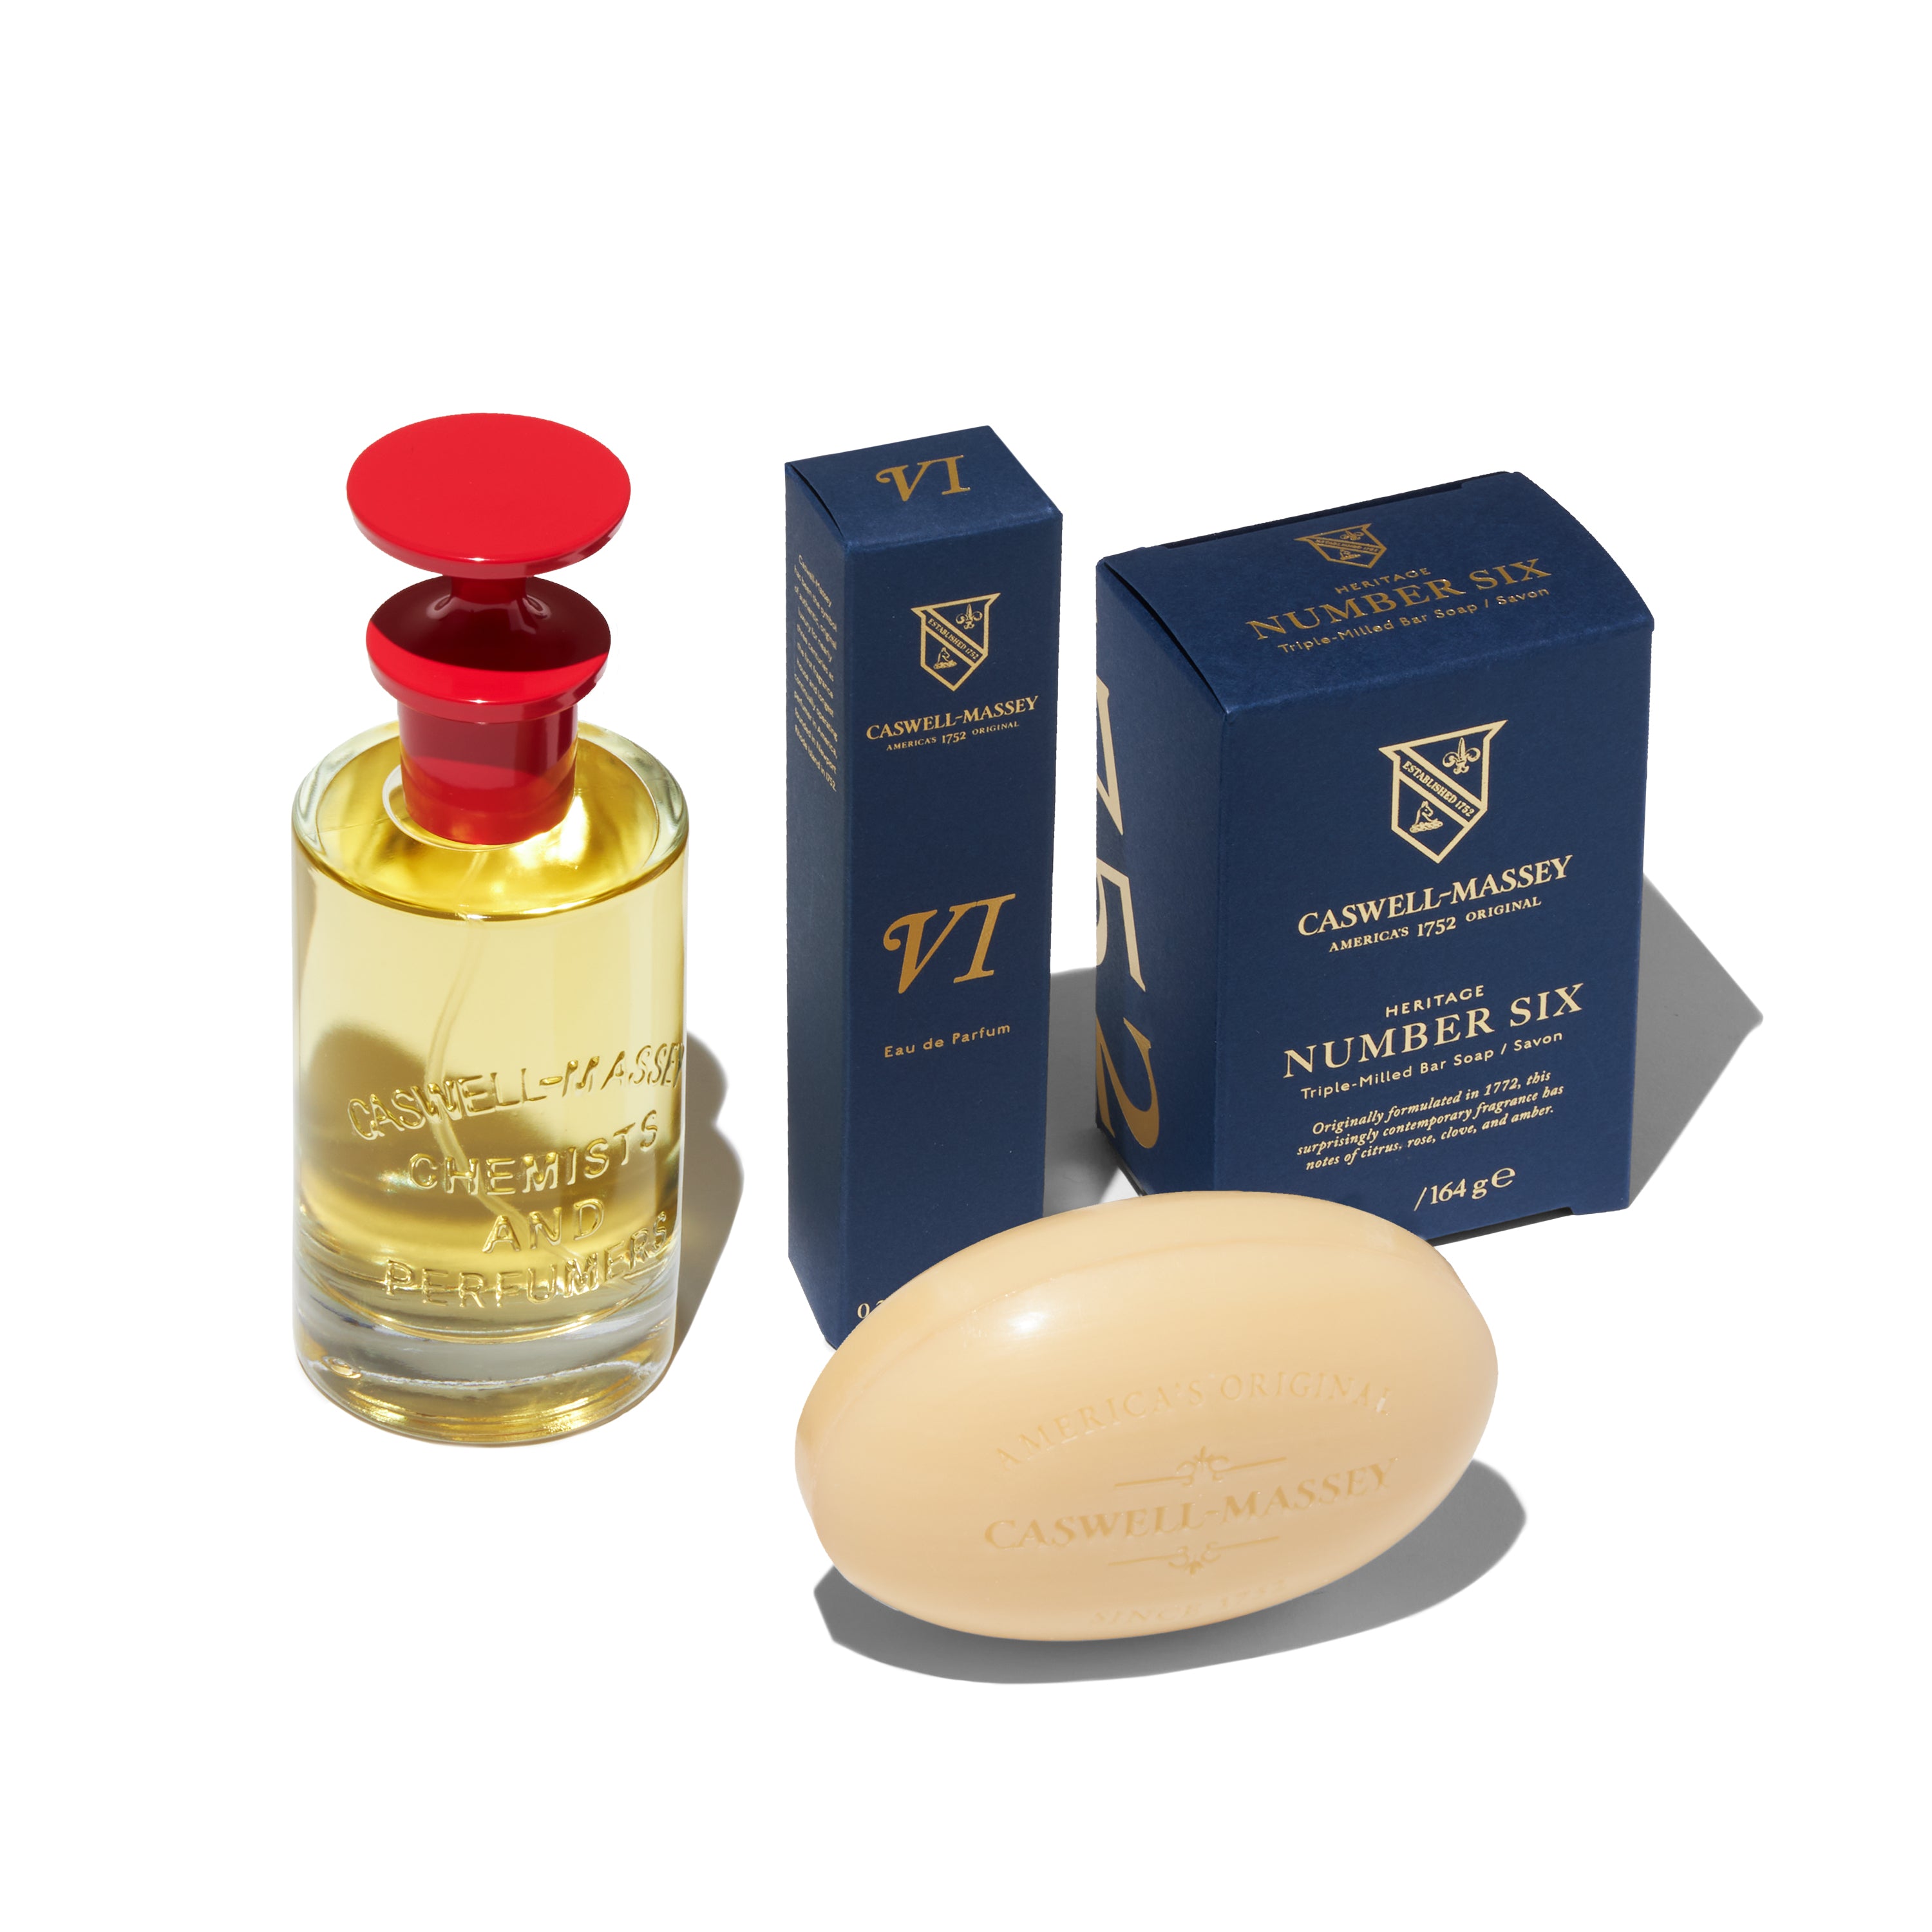 Caswell-Massey Number Six Eau de Parfum showing full-size 100ml, travel-size 7.5ml, and Number Six Bar Soap